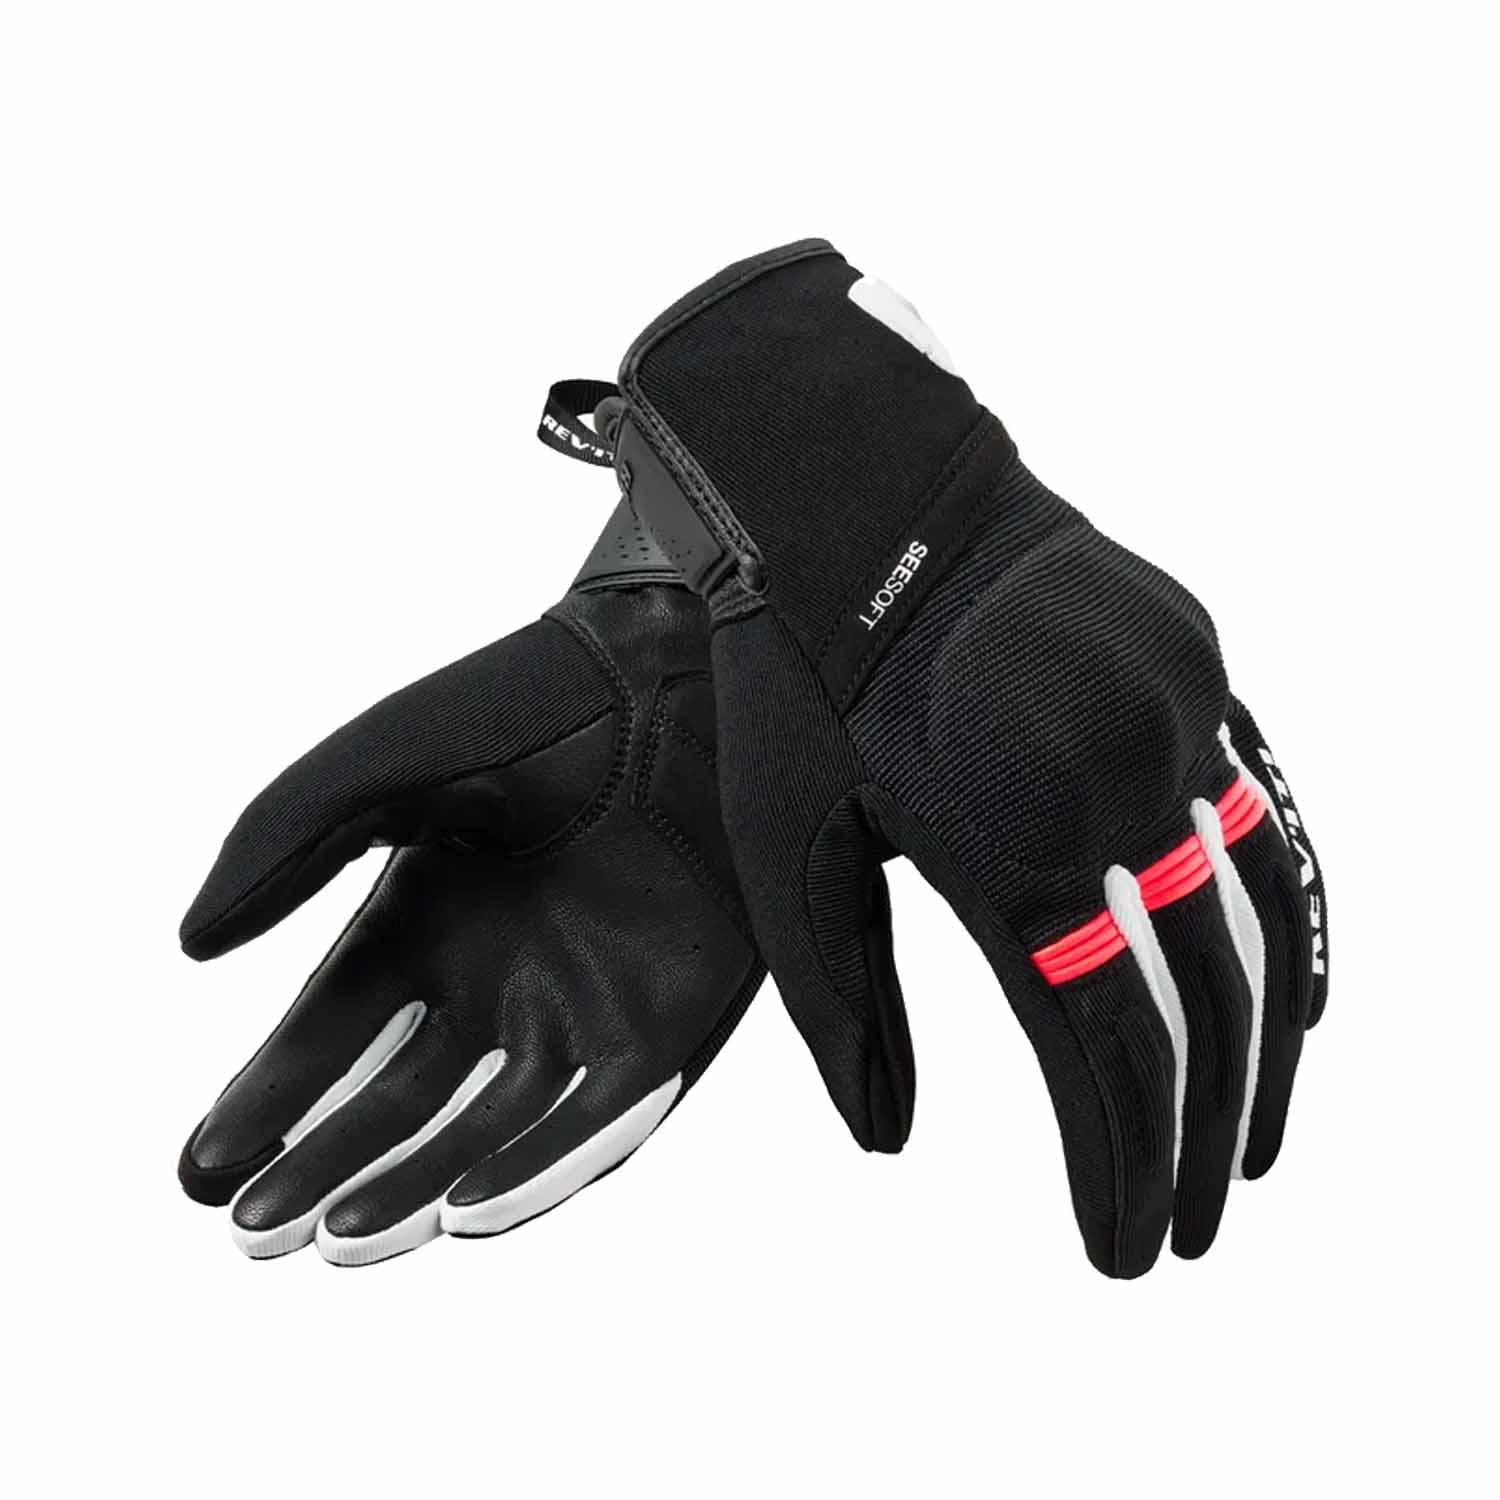 Image of EU REV'IT! Mosca 2 Ladies Gloves Black Pink Taille XS